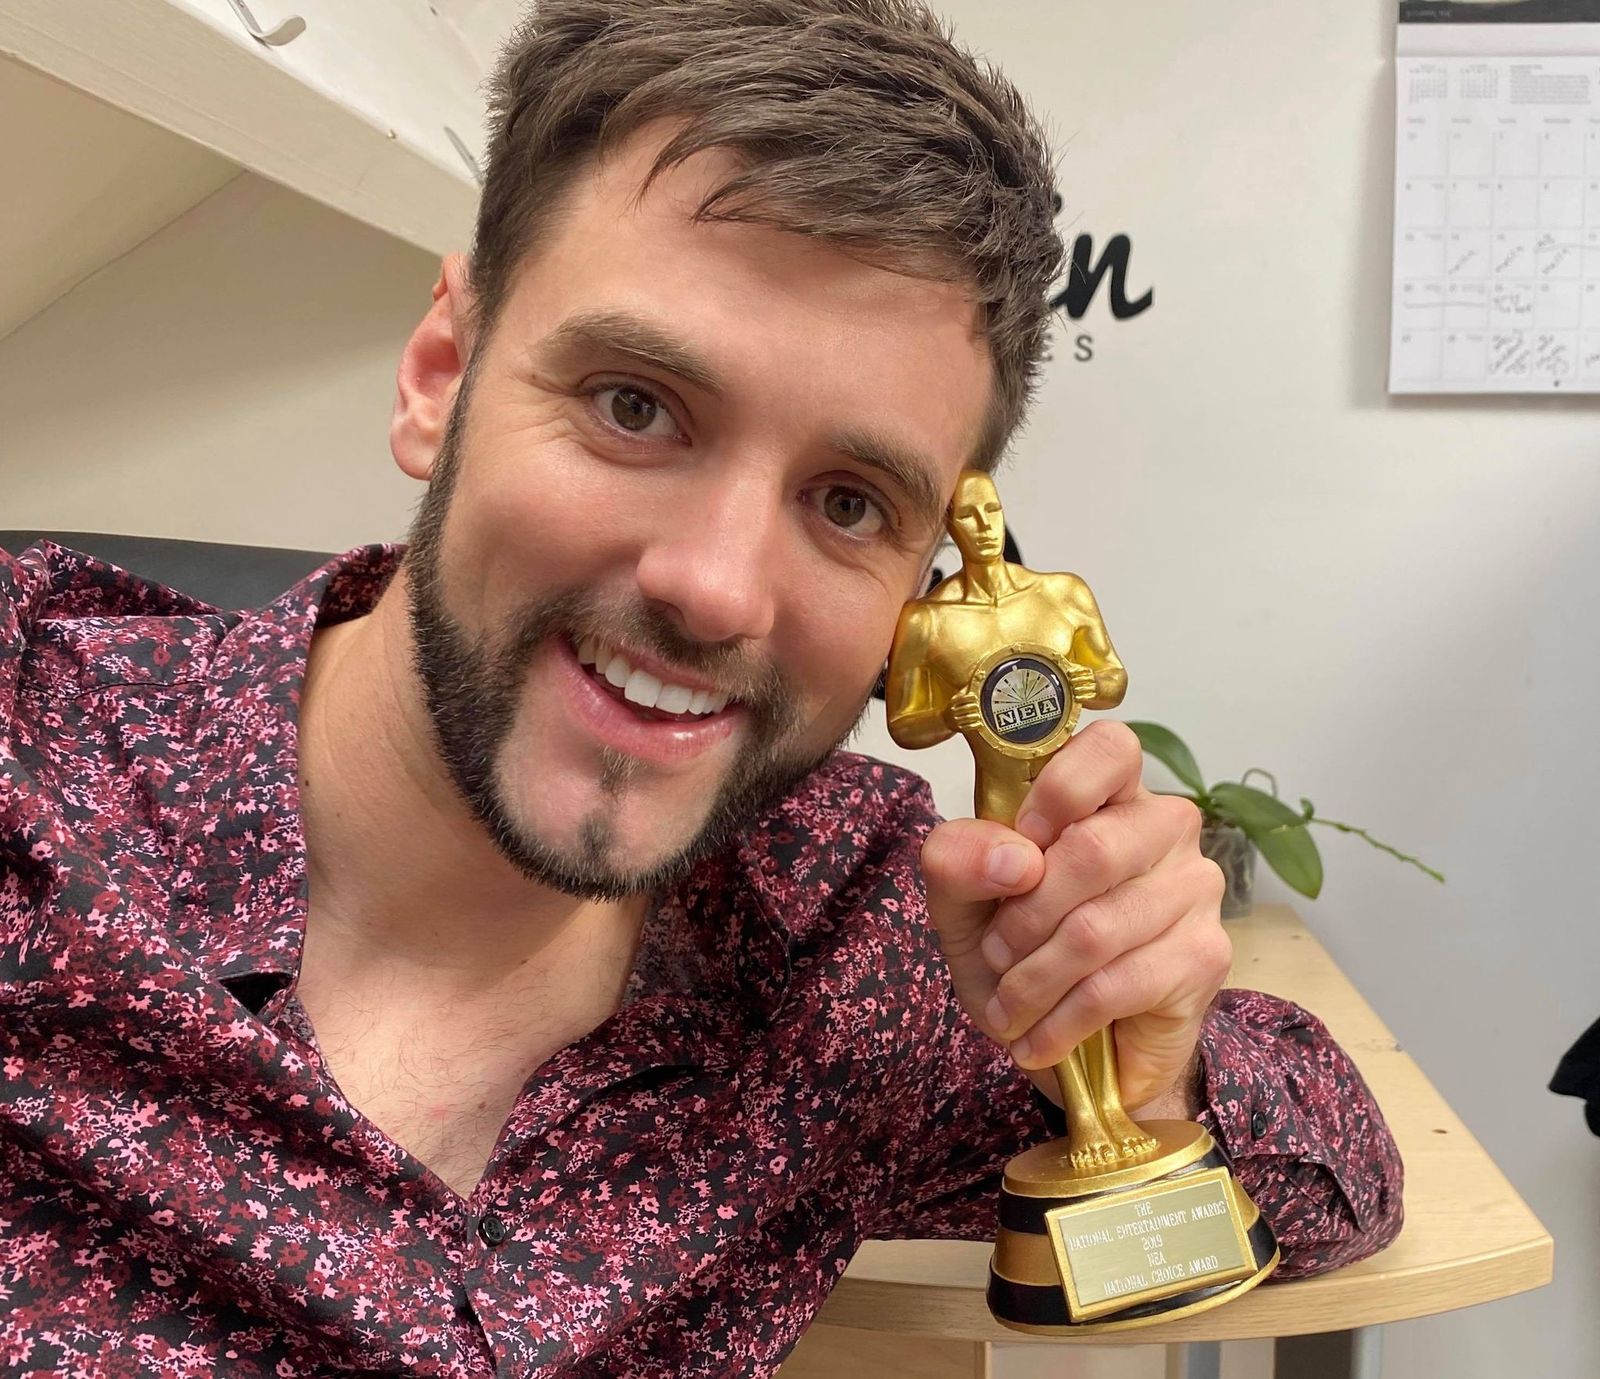 Yorkshire entertainer wins The People's Choice Award